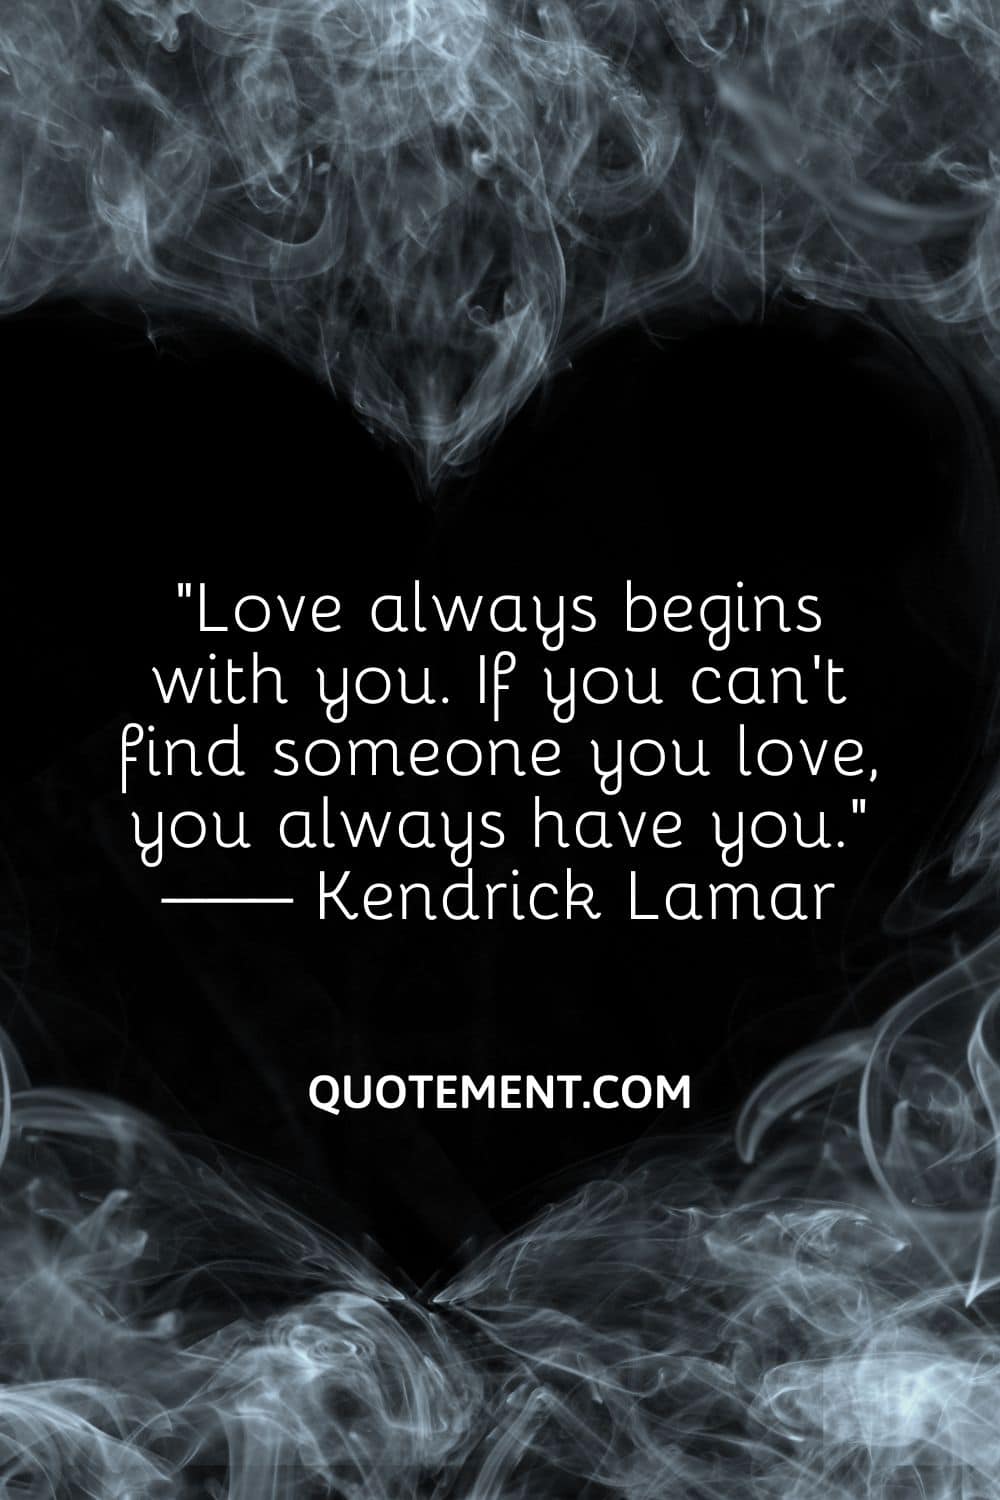 Love always begins with you. If you can’t find someone you love, you always have you